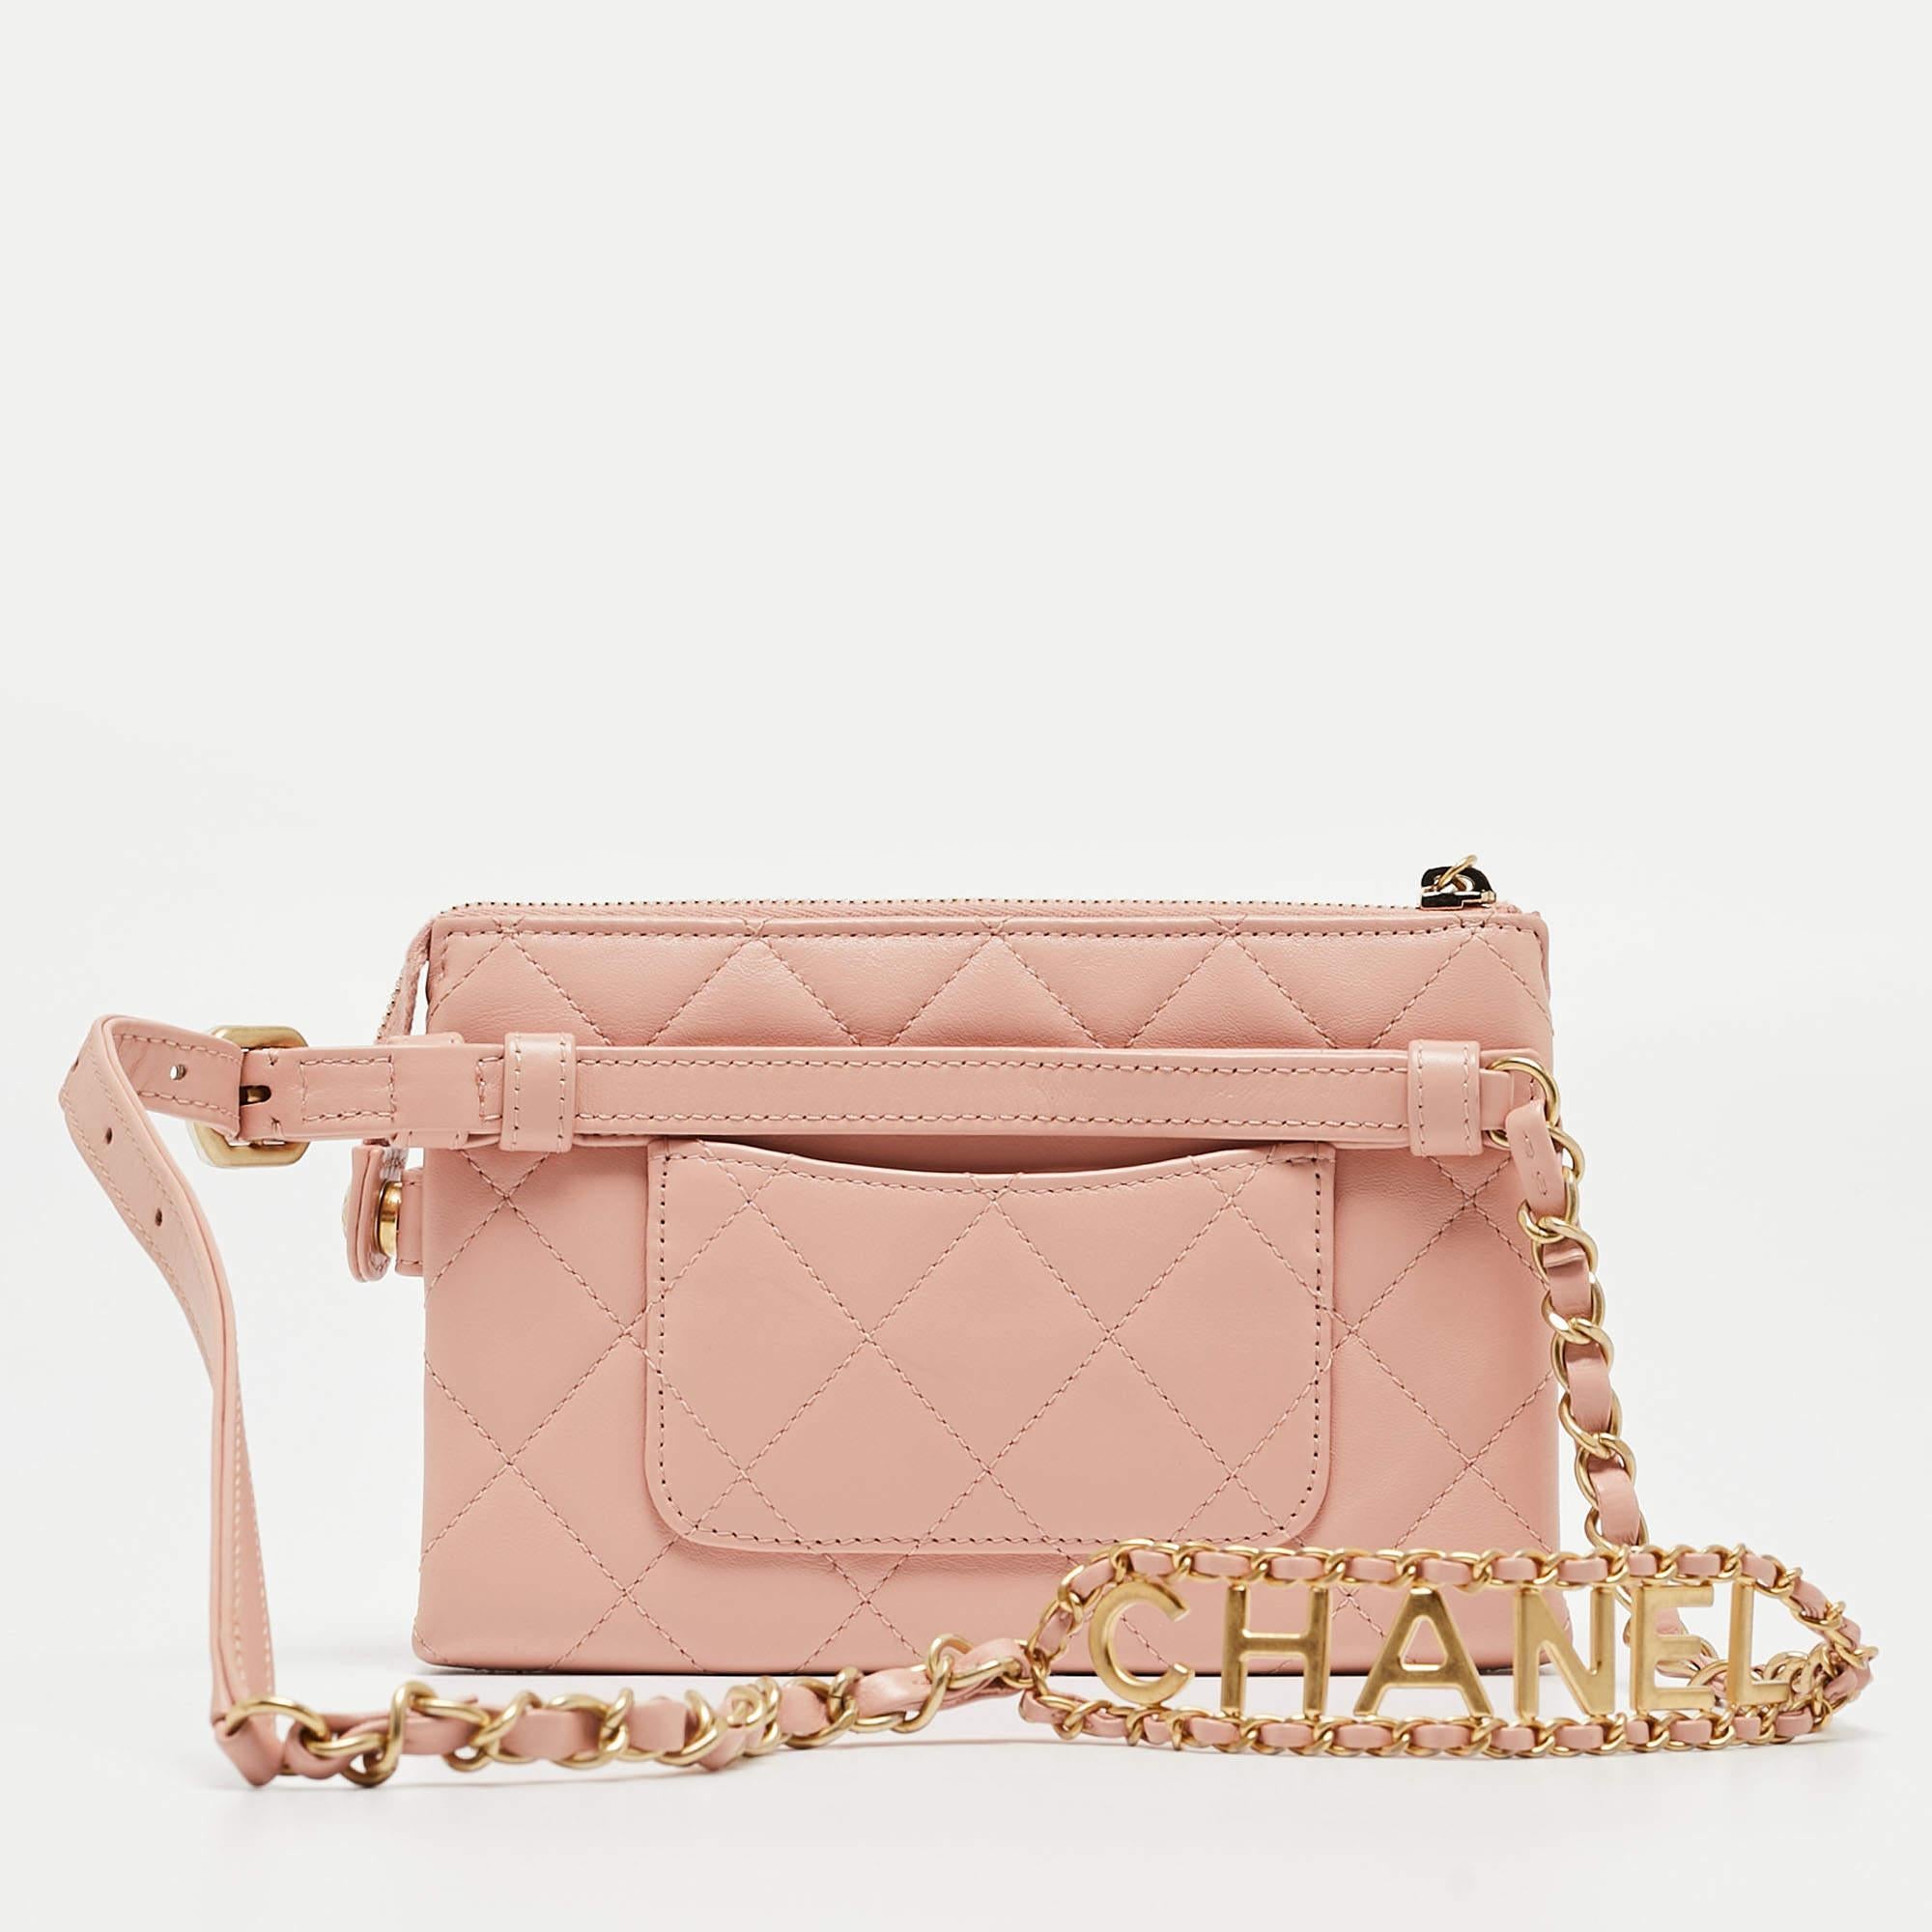 This uber-stylish Chanel waist belt bag aims to be an elevating piece. It is carefully created using light pink leather and has a CC zip pull. See how it transforms a T-shirt dress or a solid jumpsuit!

Includes: Original Dustbag, Authenticity Card